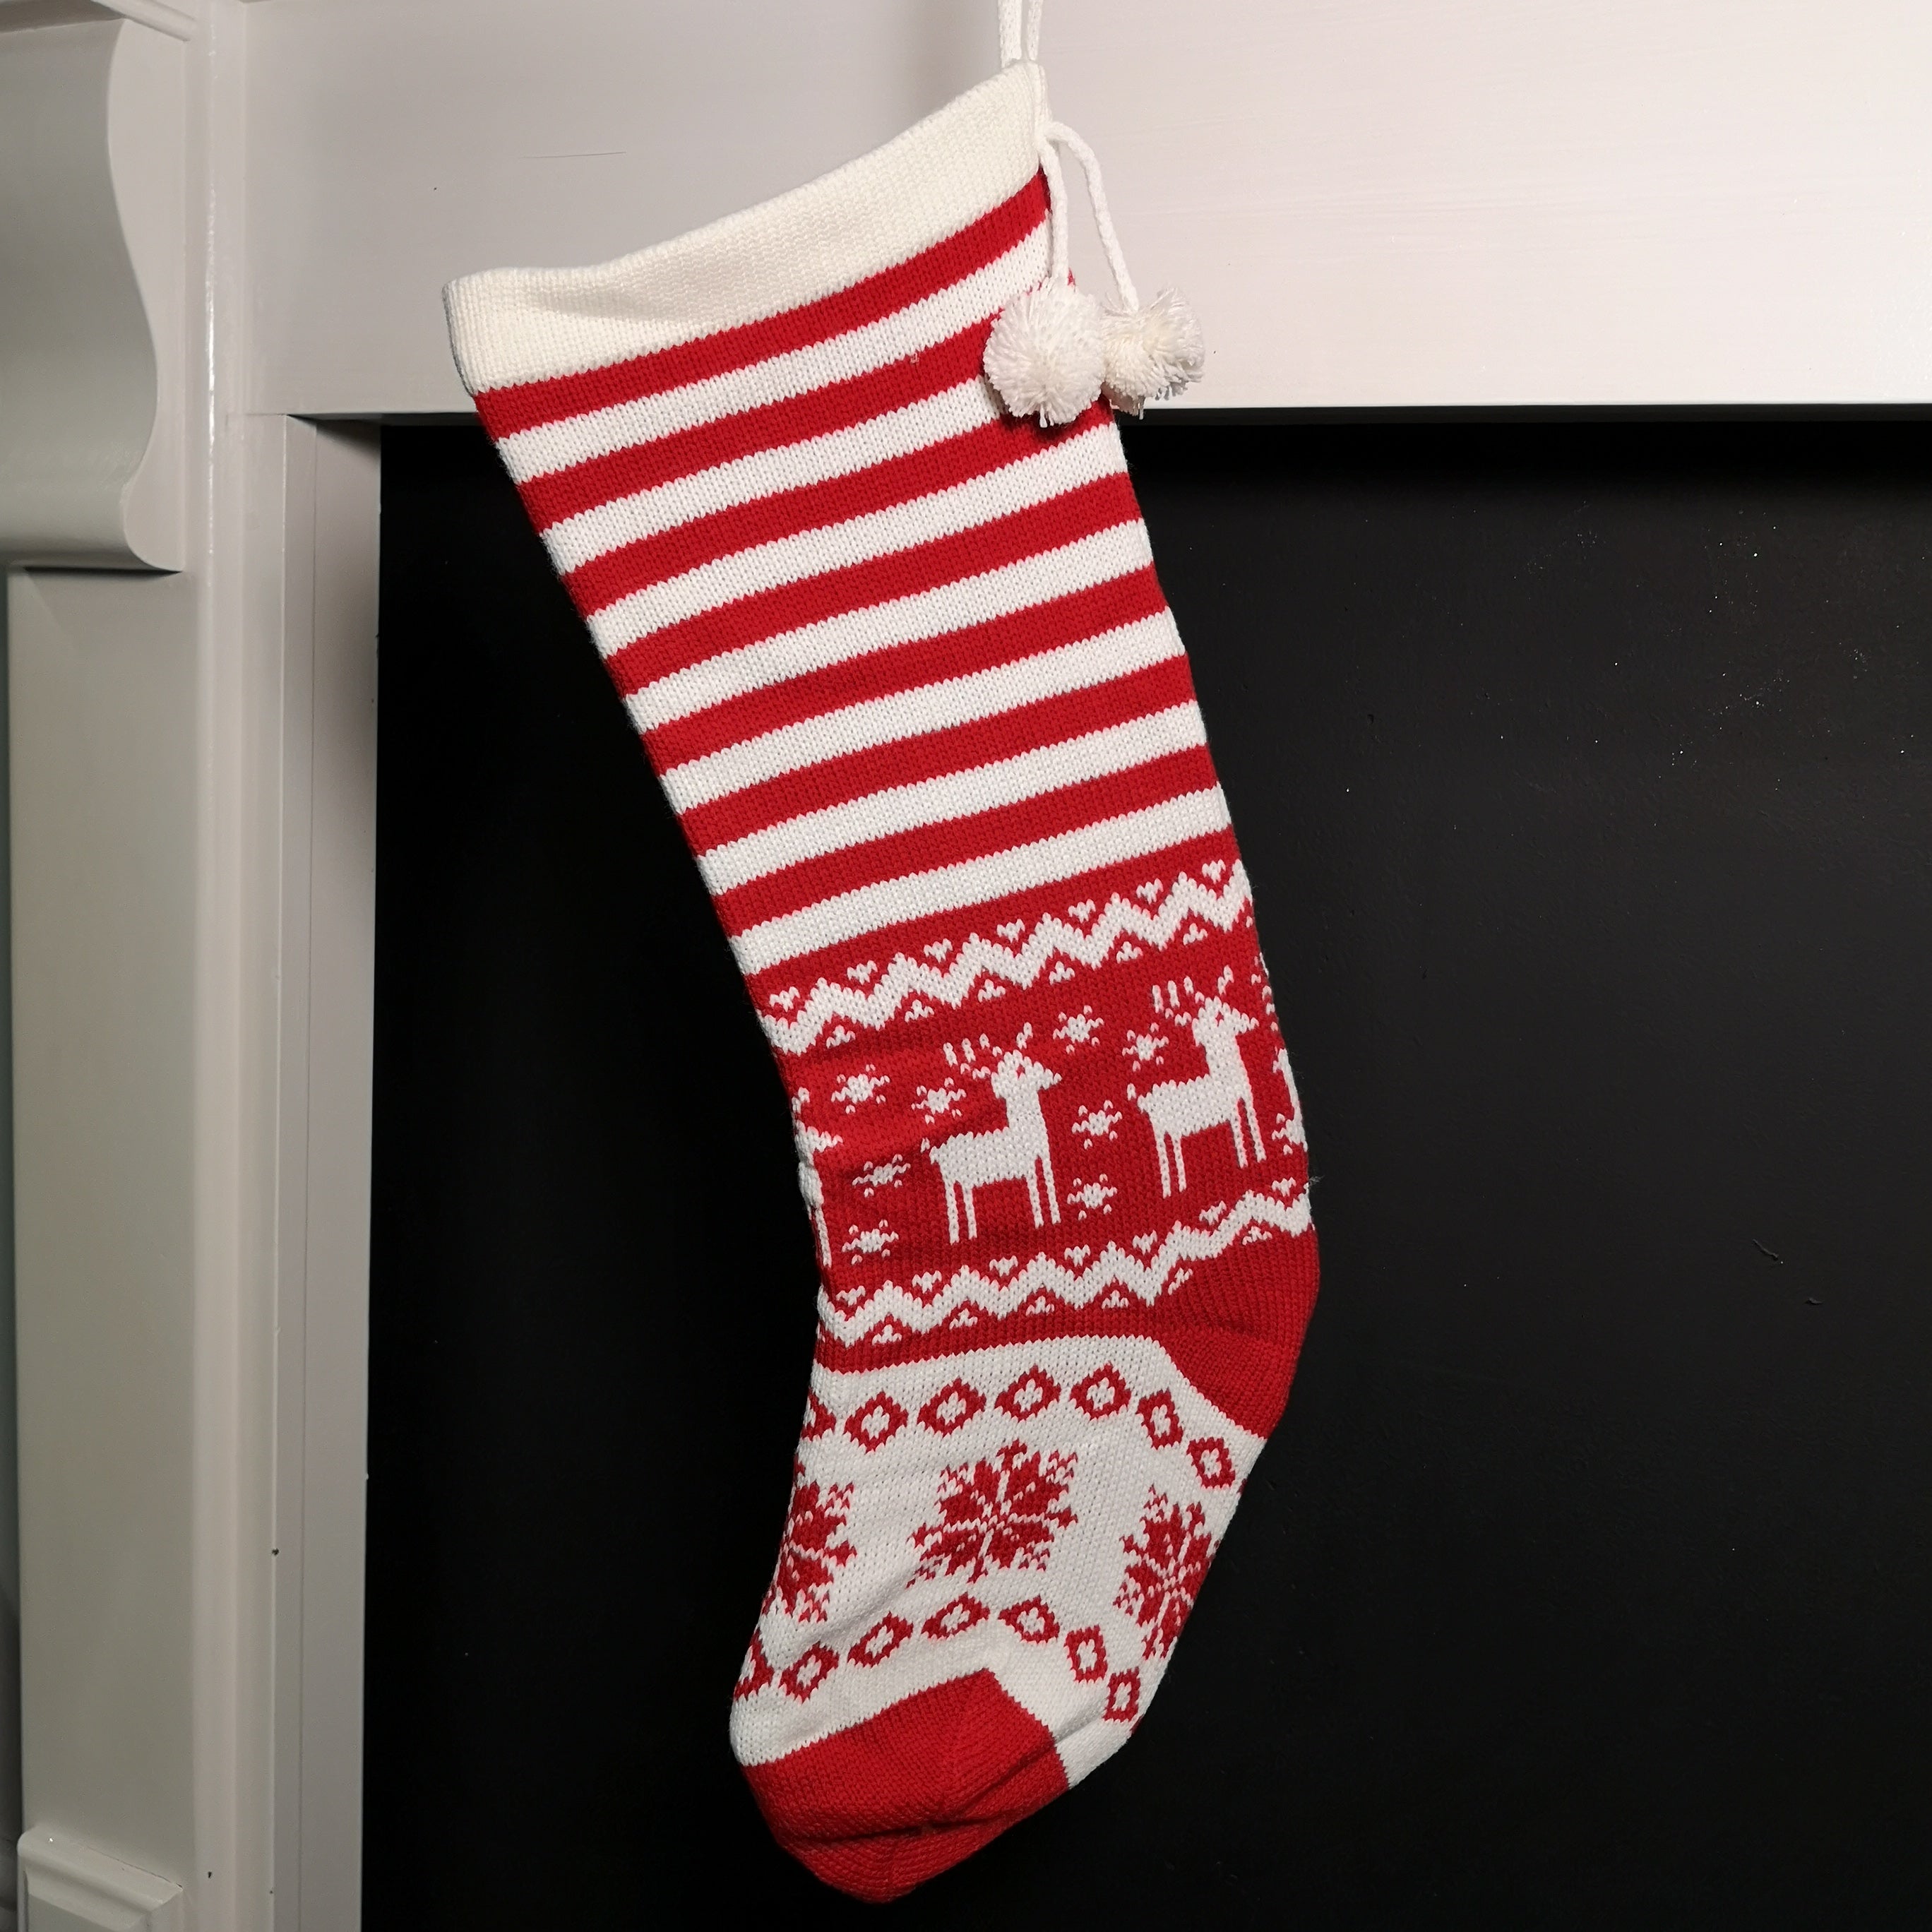 60cm Festive Knitted Christmas Stocking Decoration in Red with Reindeer Design